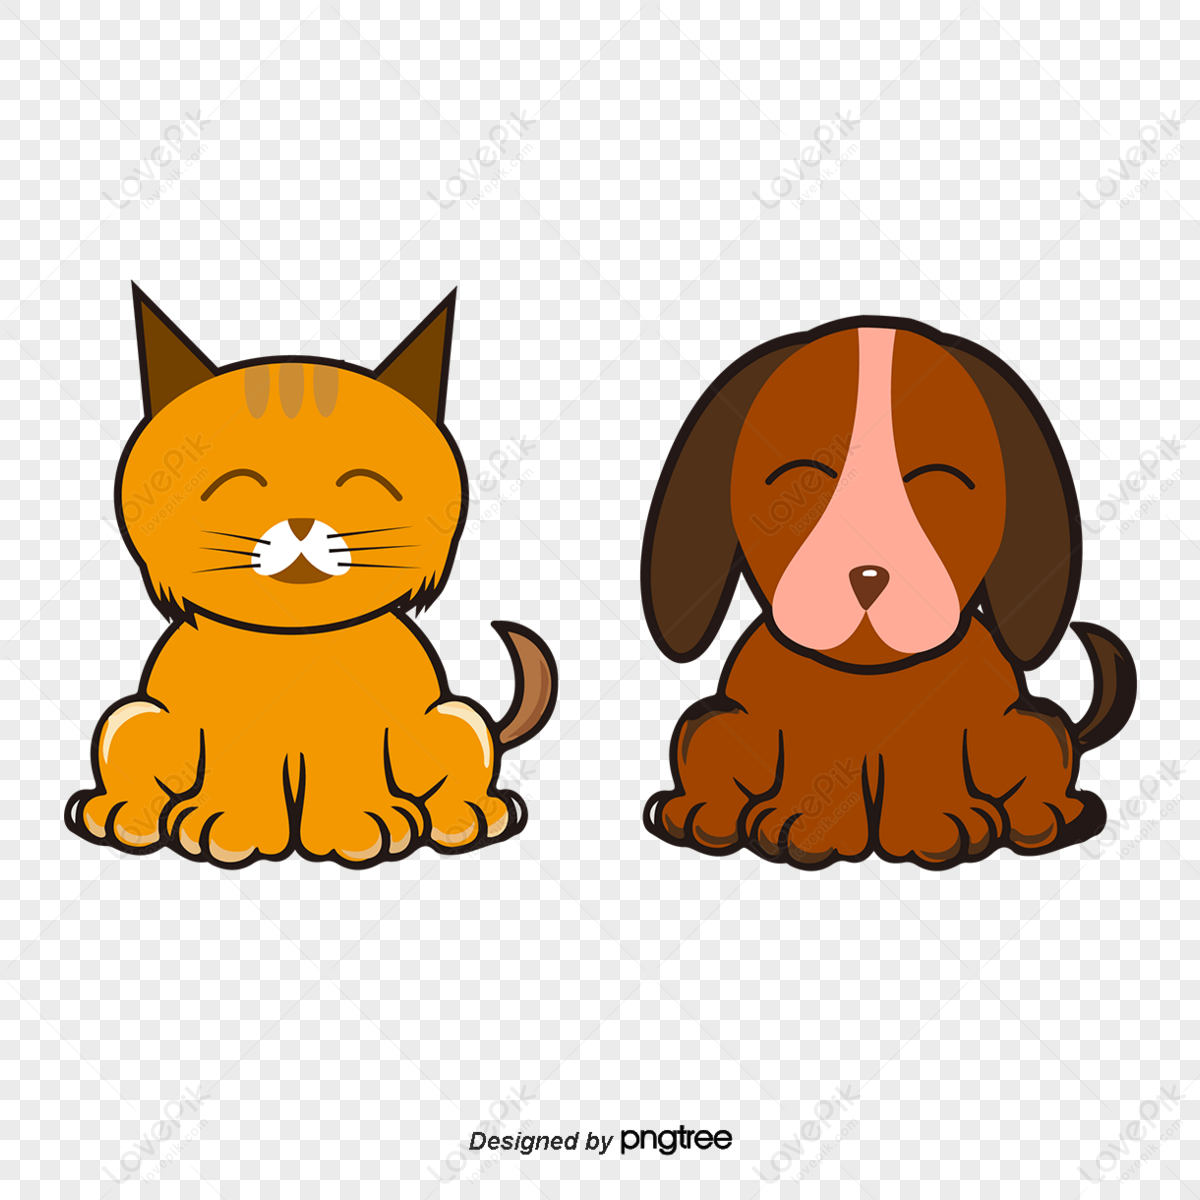 Dog And Cats PNG Image, Cartoon Dog Cat Material Red Dogs, Dog